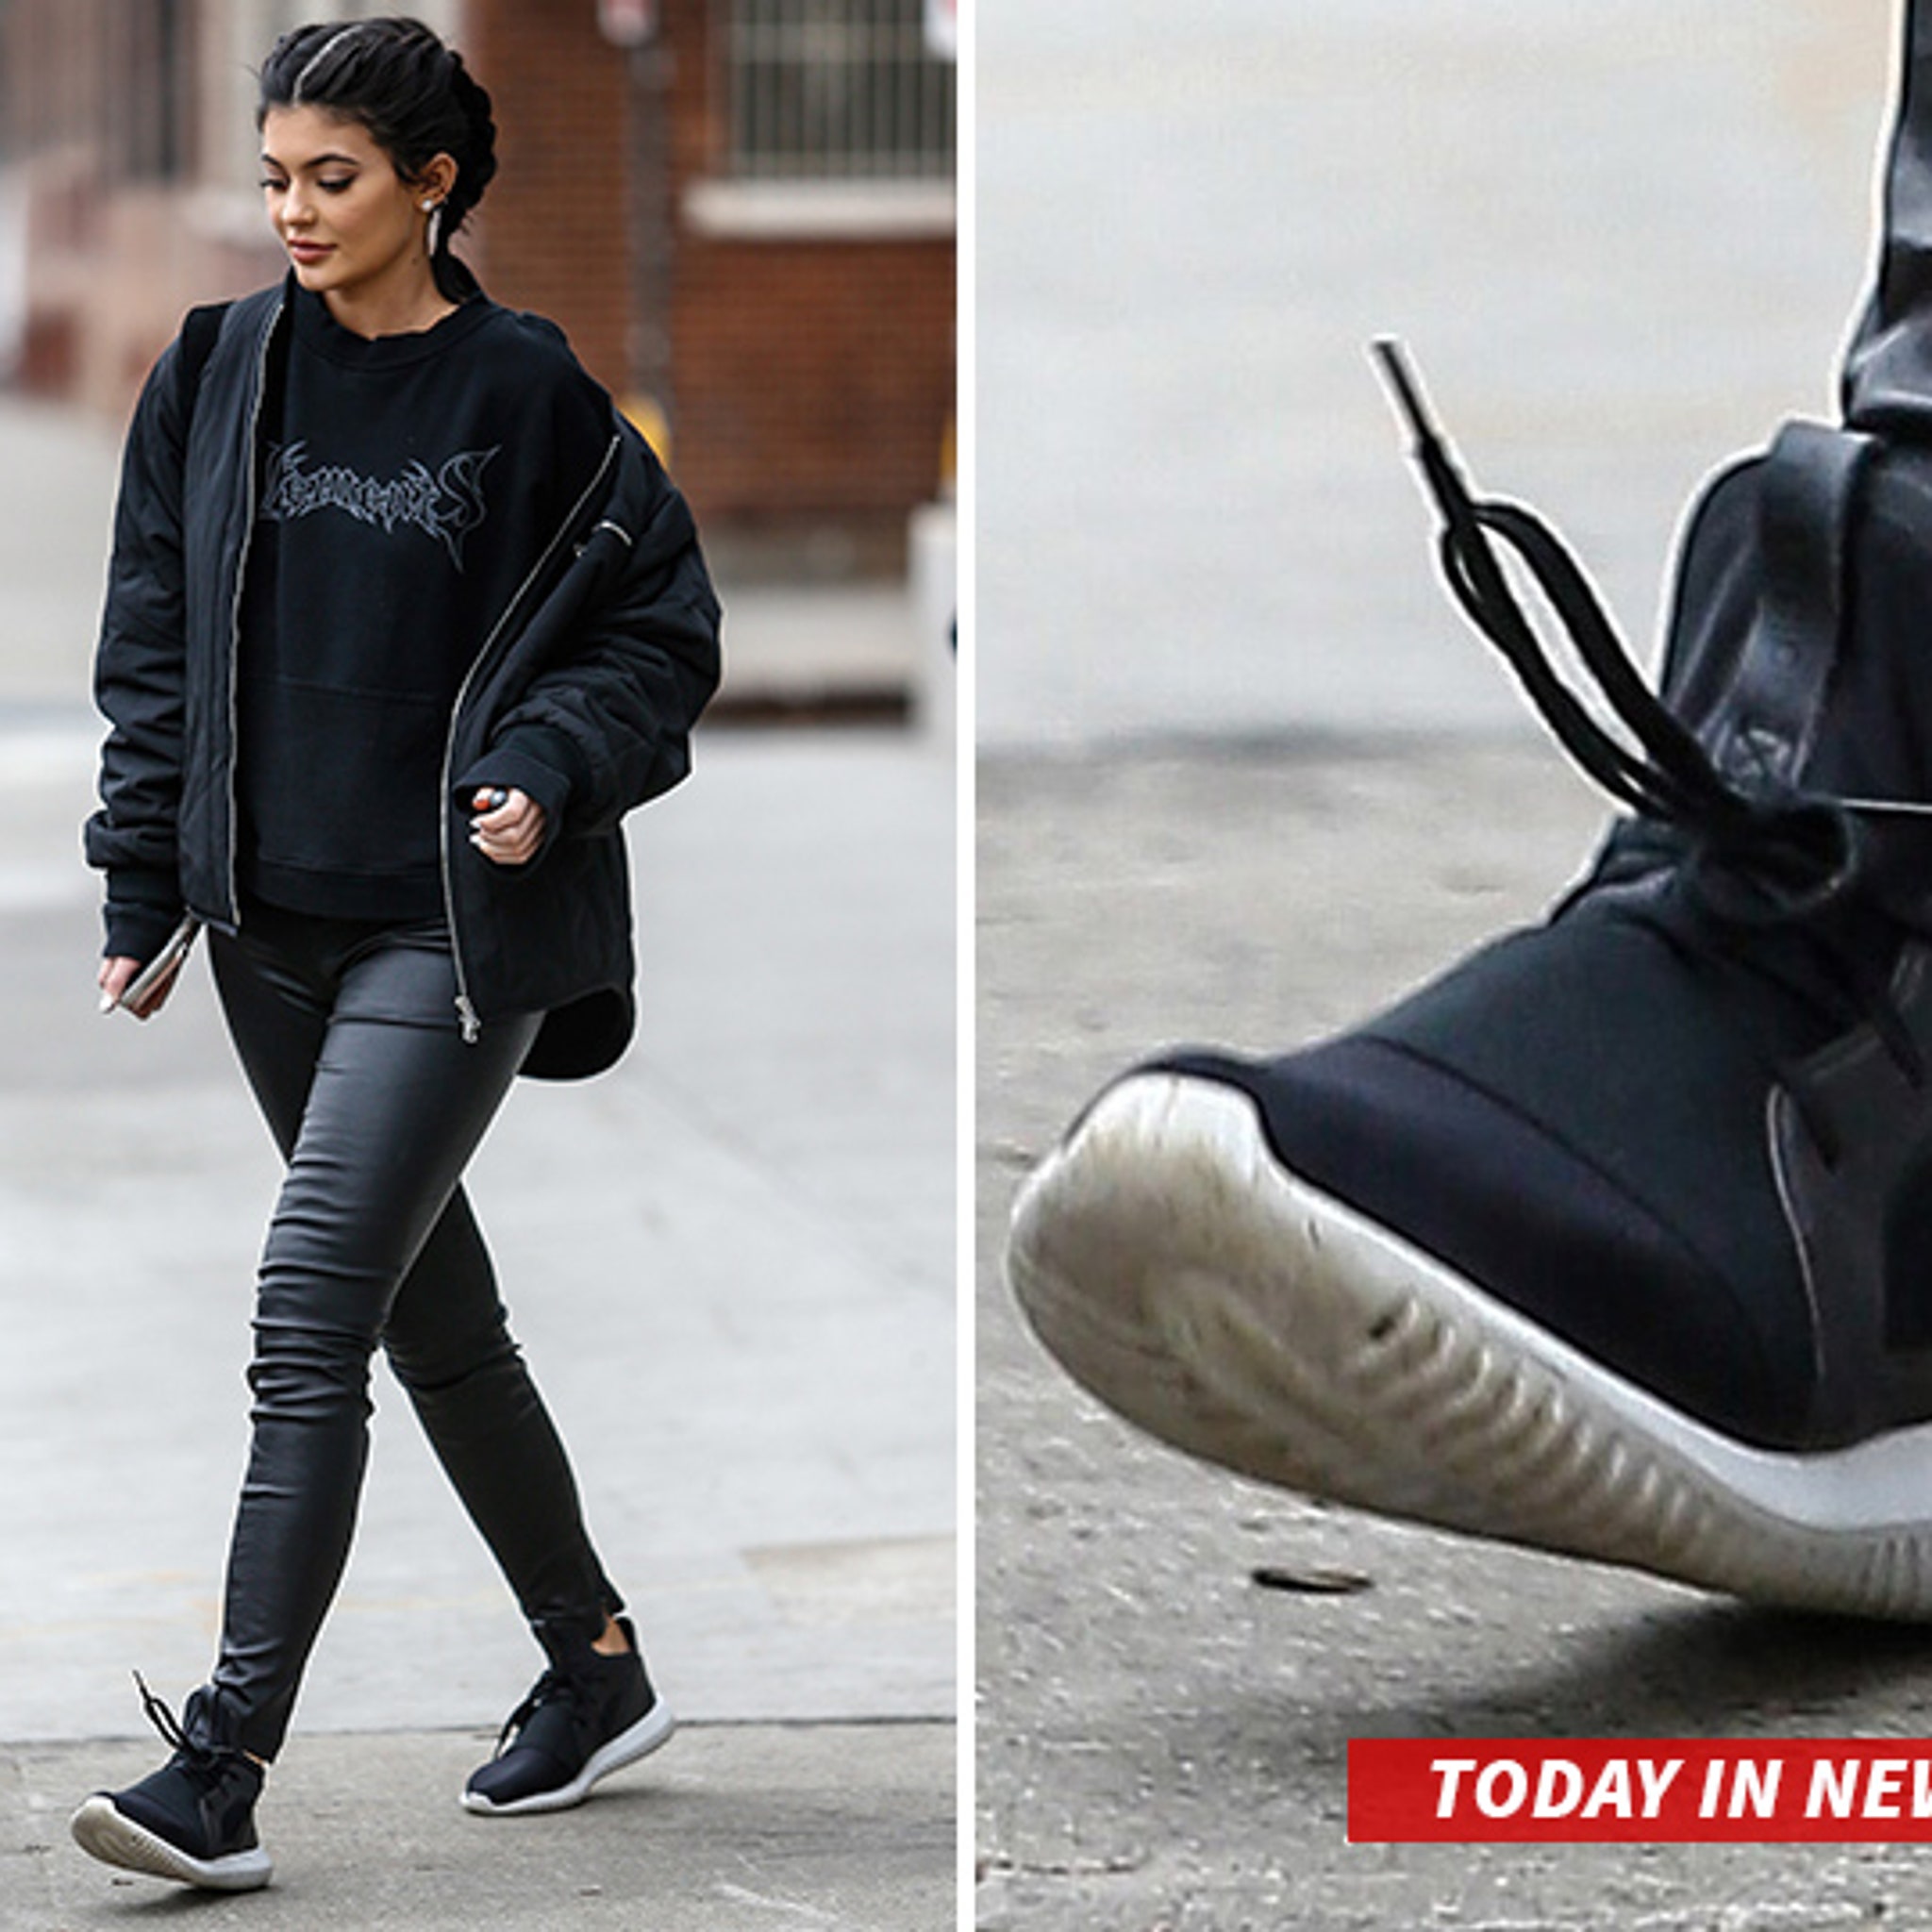 Kylie Jenner Steps Out in Adidas Just After Puma Deal Announcement: Photo  3582019 | Kanye West, Kylie Jenner Photos | Just Jared: Entertainment News